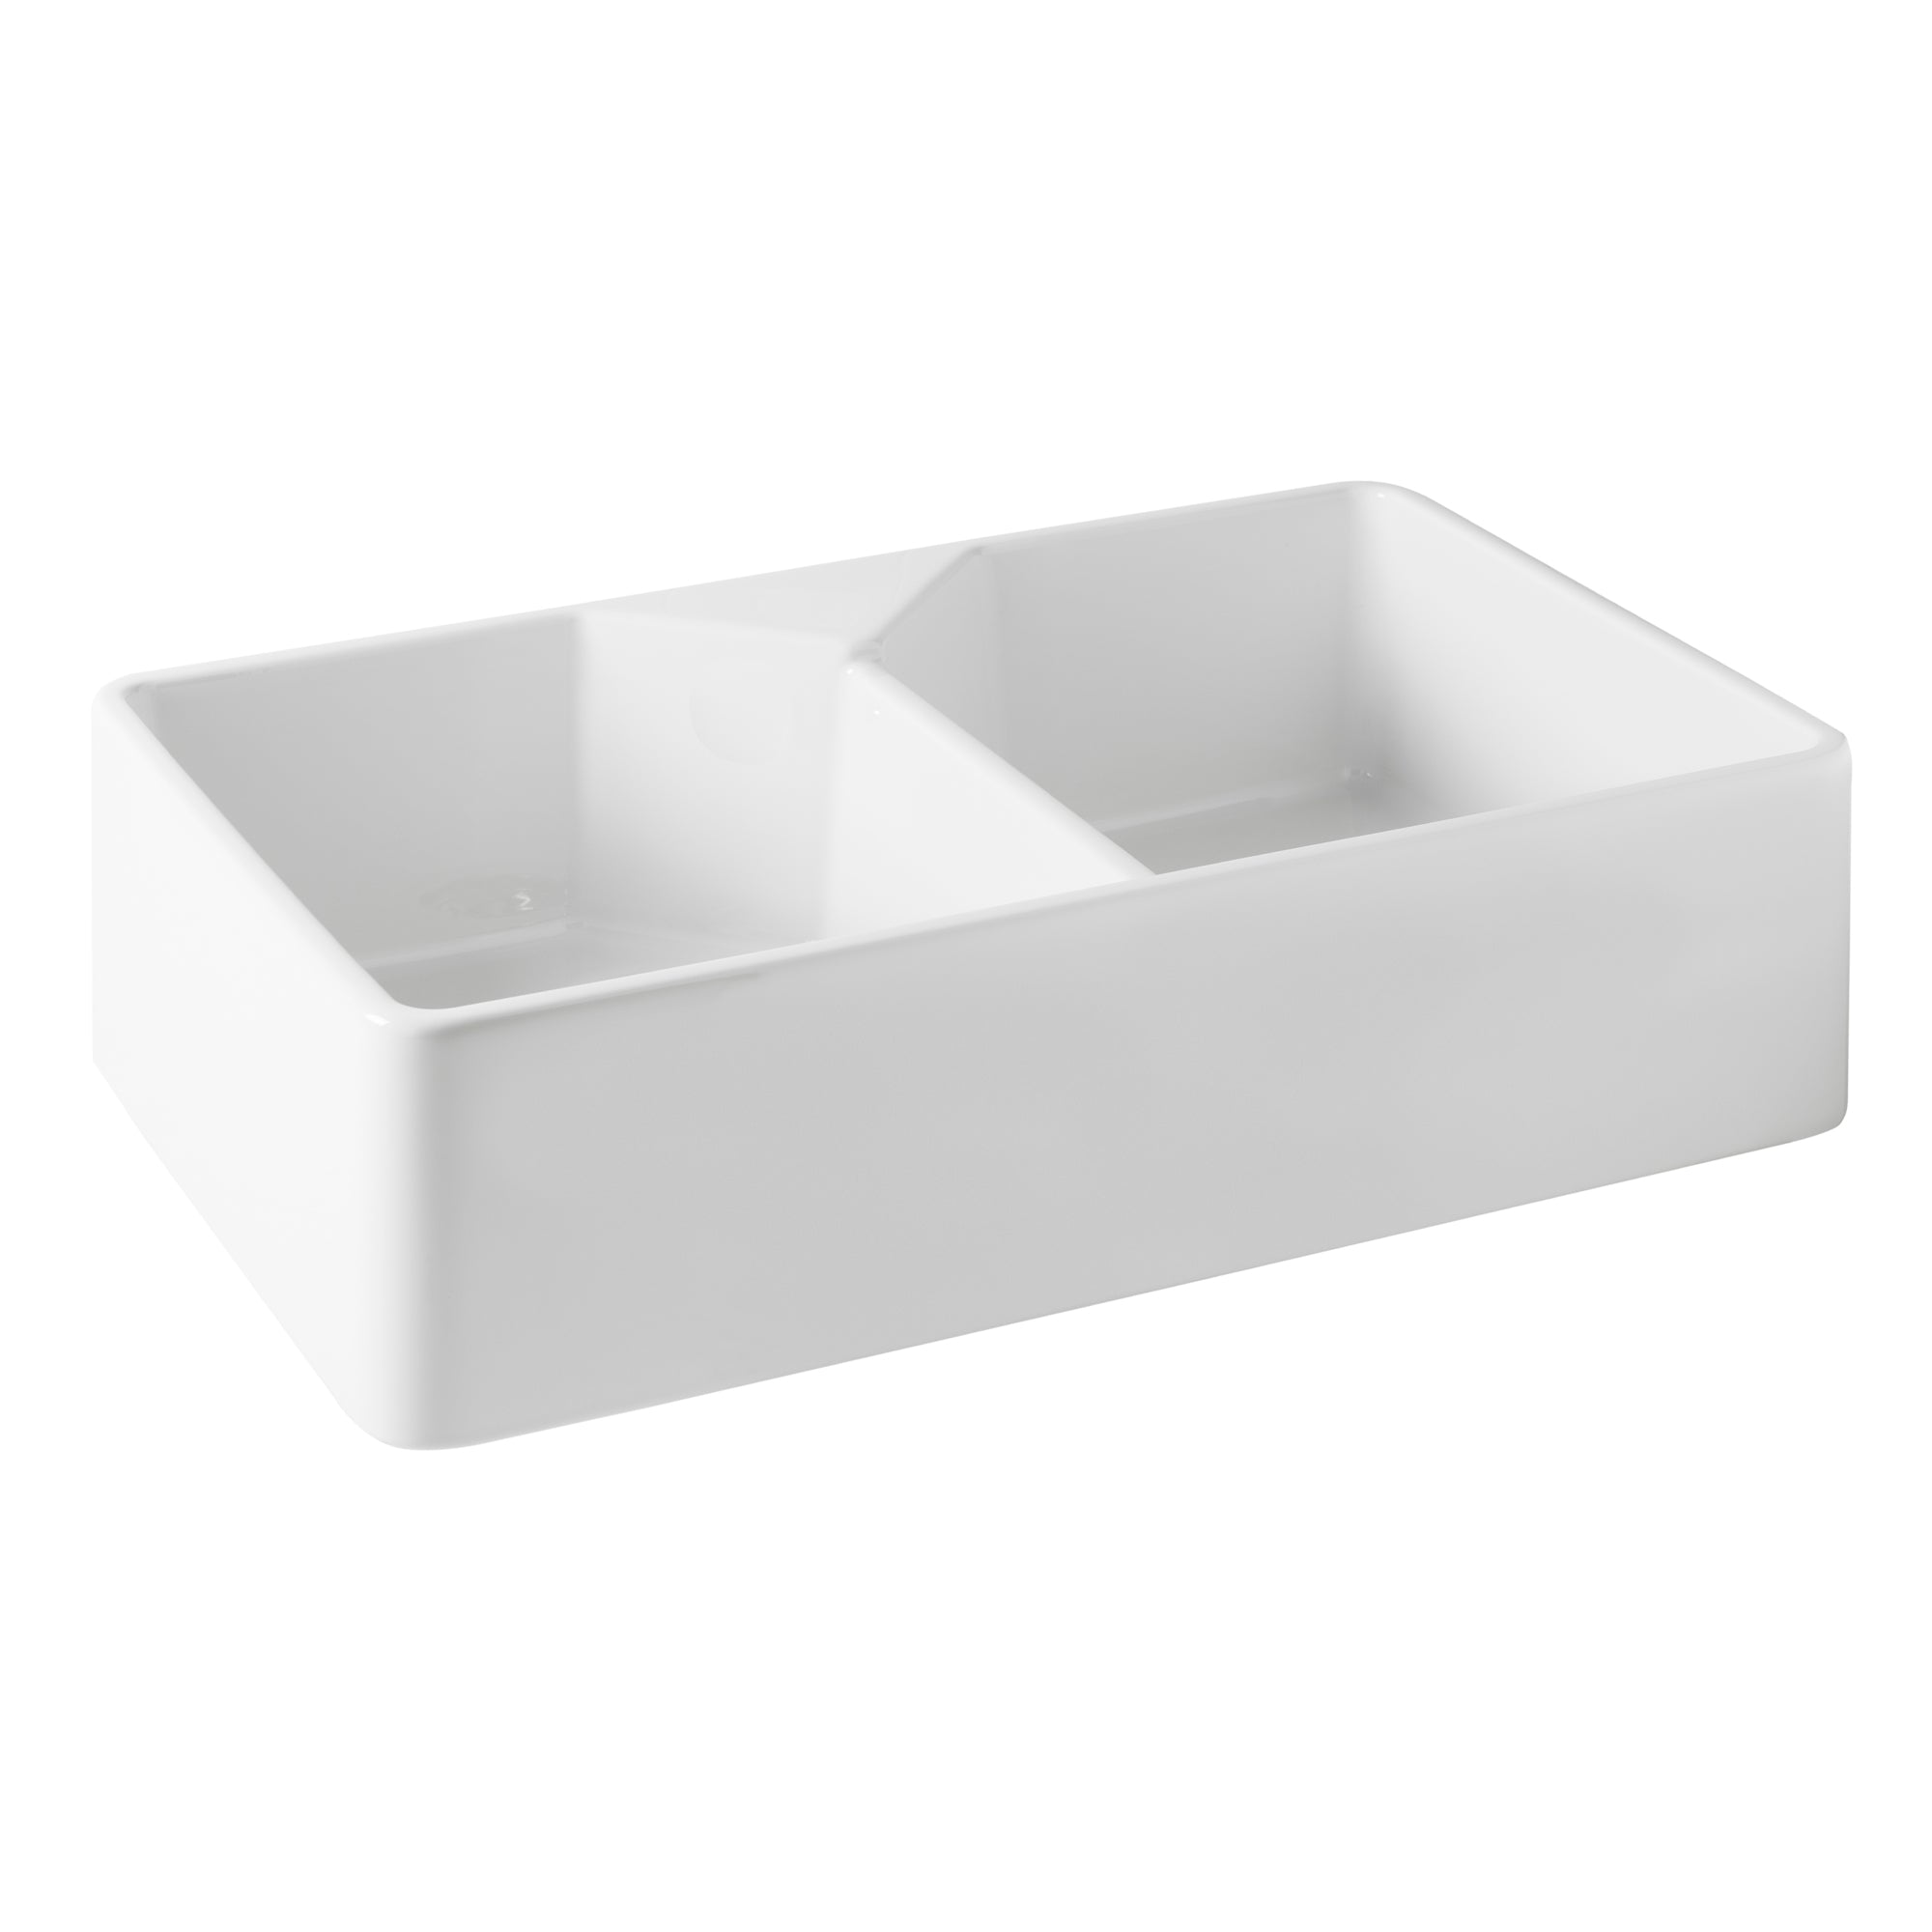 TURNER HASTINGS CHESTER FARMHOUSE DOUBLE BOWL BUTLER SINK WITH NO TAPHOLE GLOSS WHITE 800MM